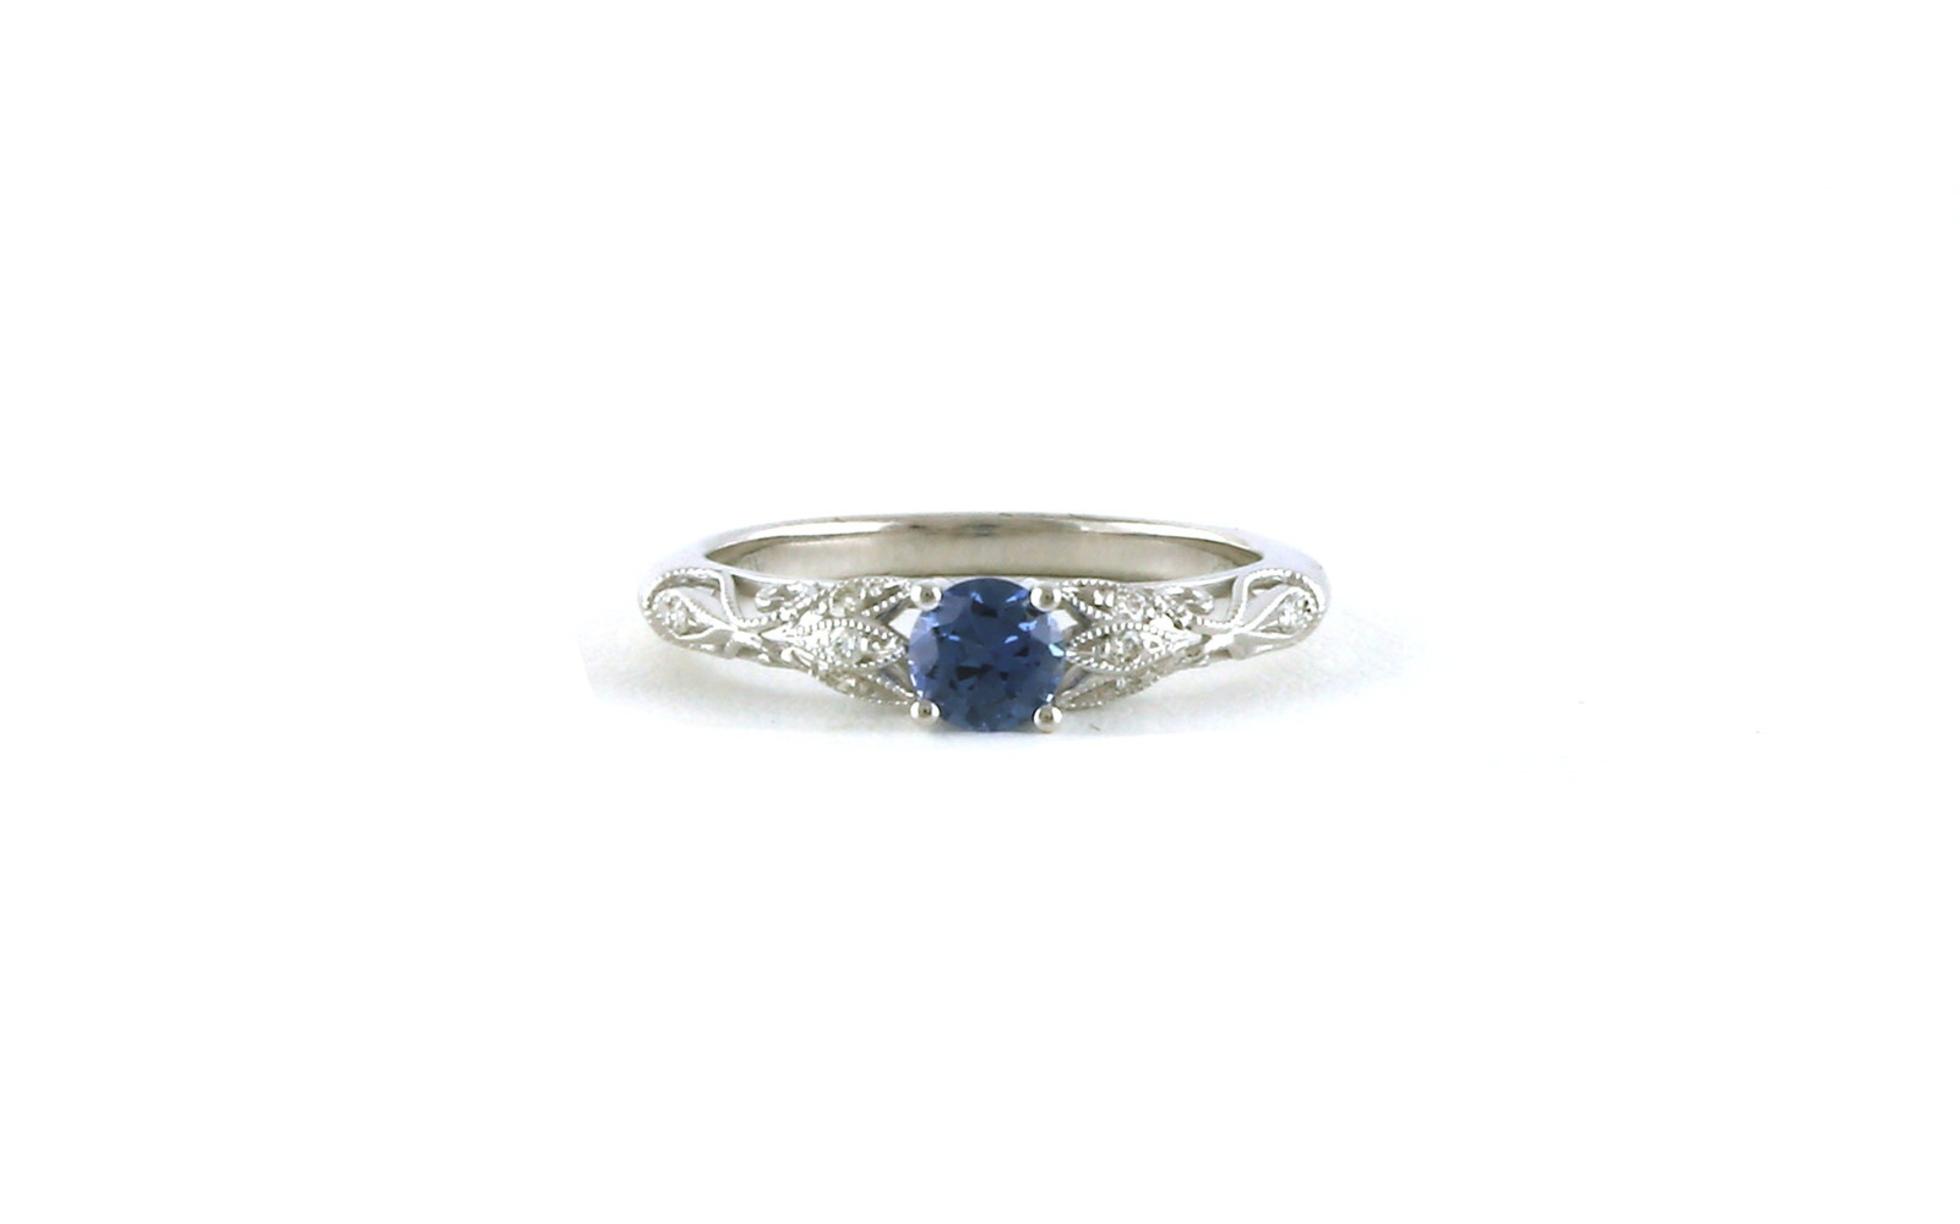 Filigree Montana Yogo Sapphire and Diamond Ring with Hand Engraving and Milgrain Detail in White Gold (0.47cts TWT)